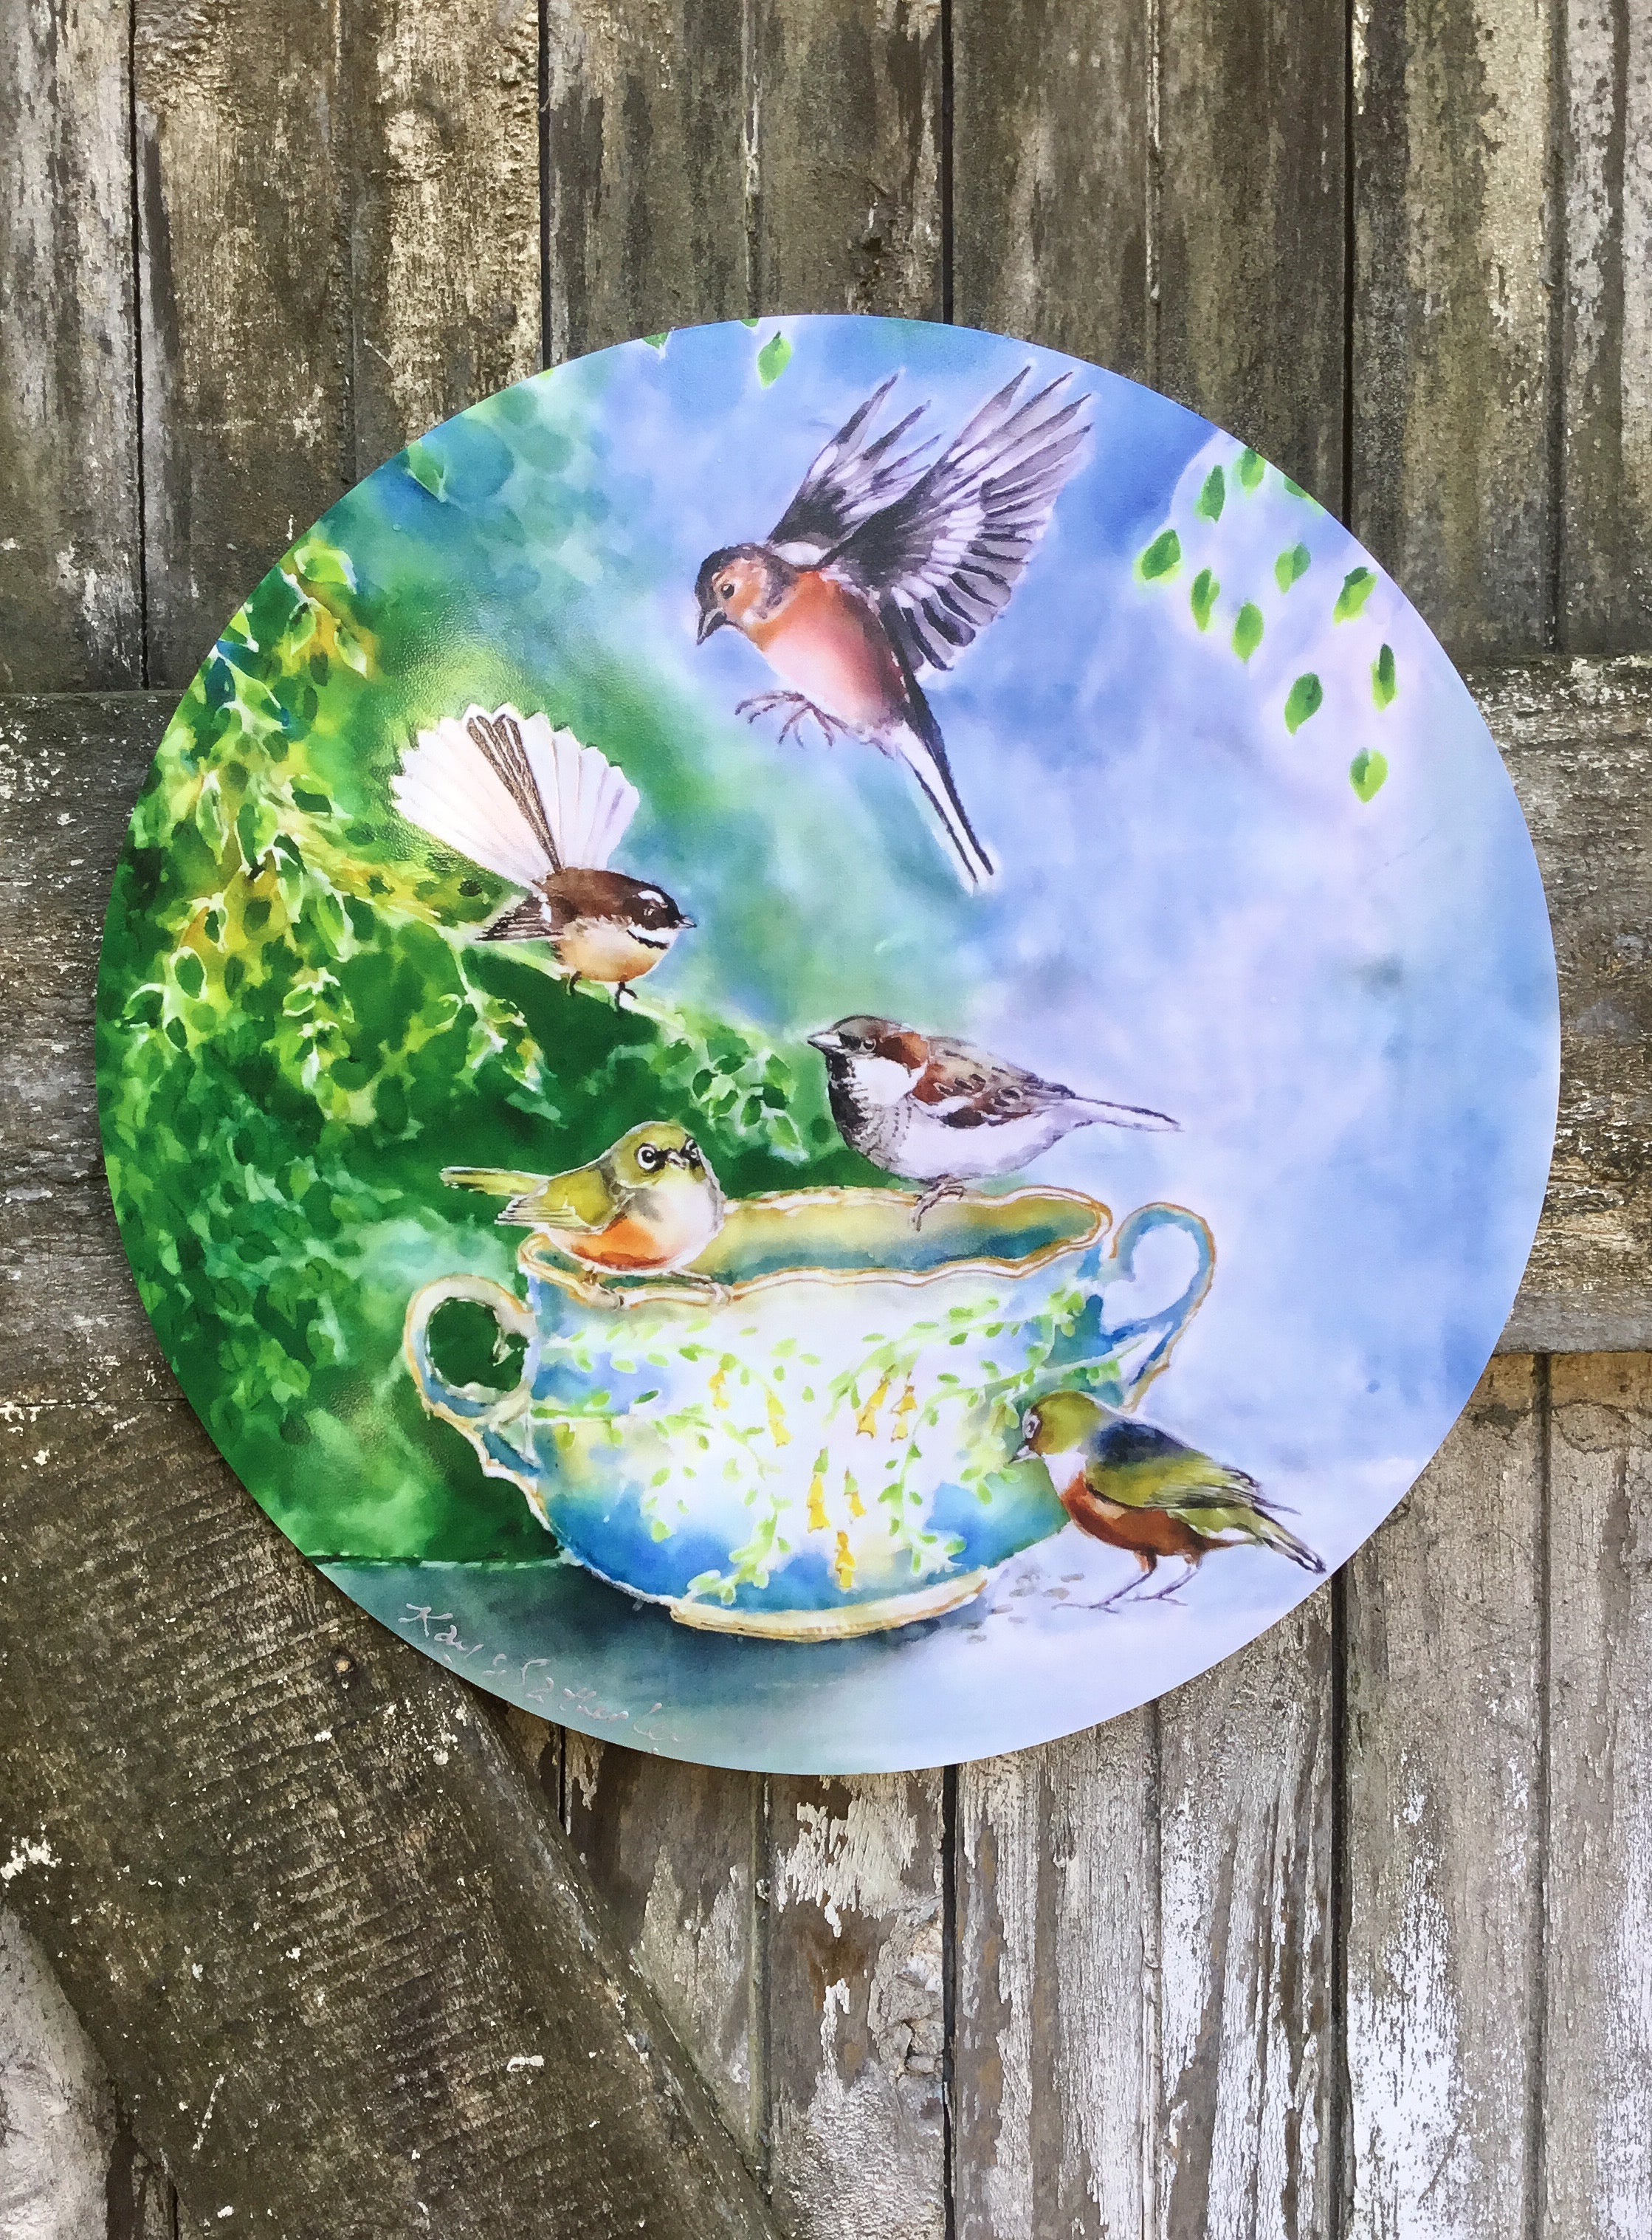 Small birds, SilverEyes, Chaffinch, Fantail and Sparrow on Vintage China - Circle Outdoor Art Panel